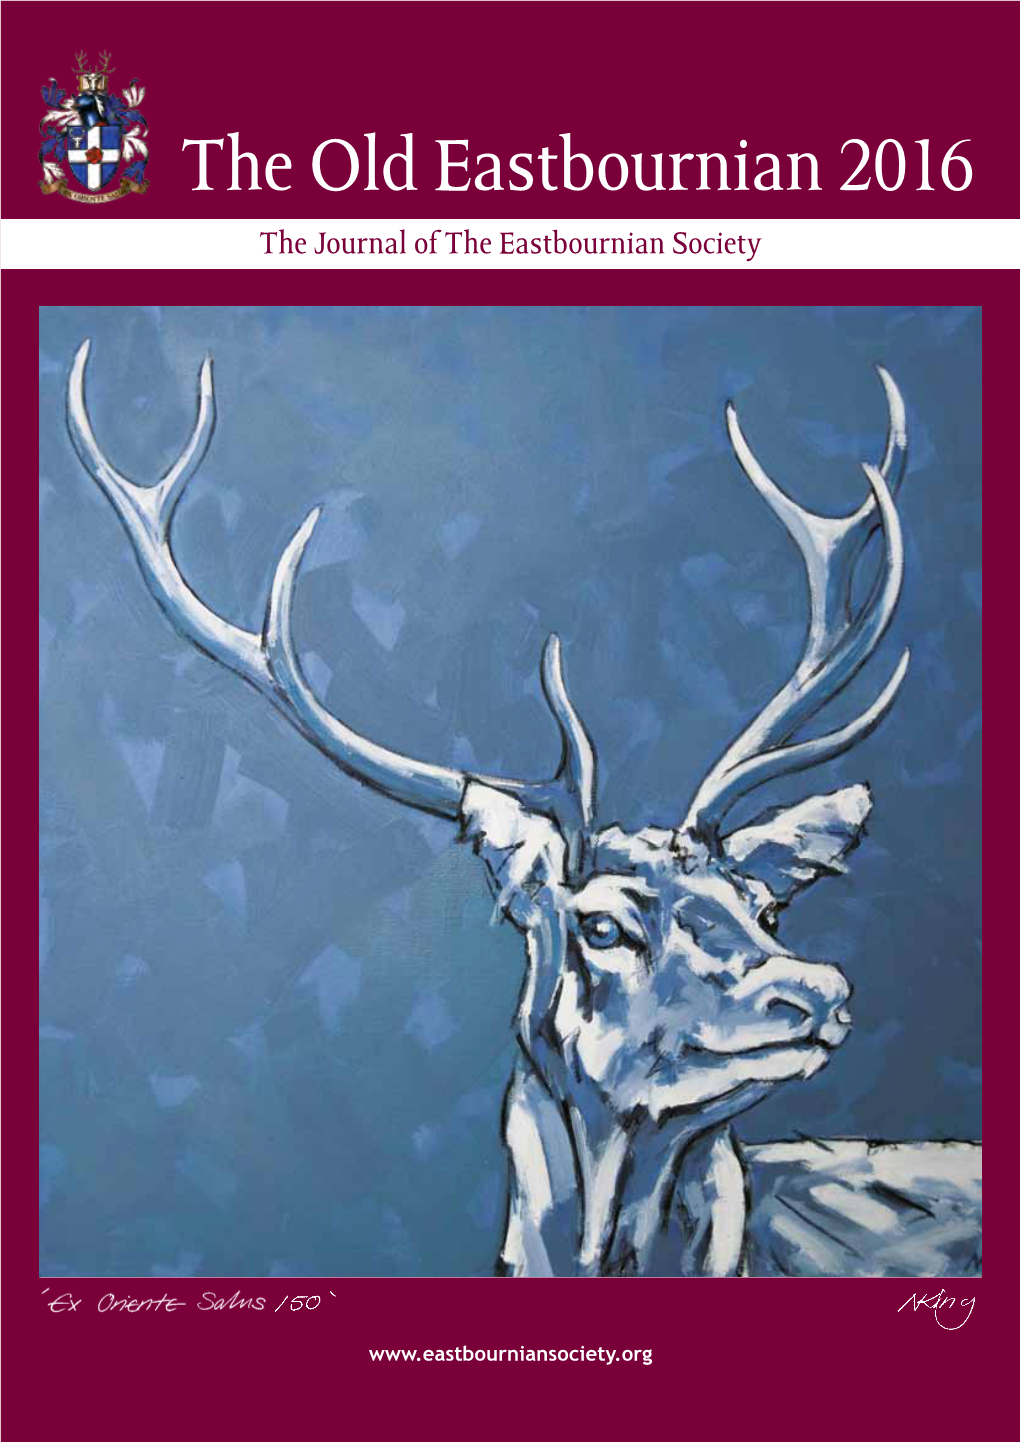 The Old Eastbournian 2016 the Journal of the Eastbournian Society